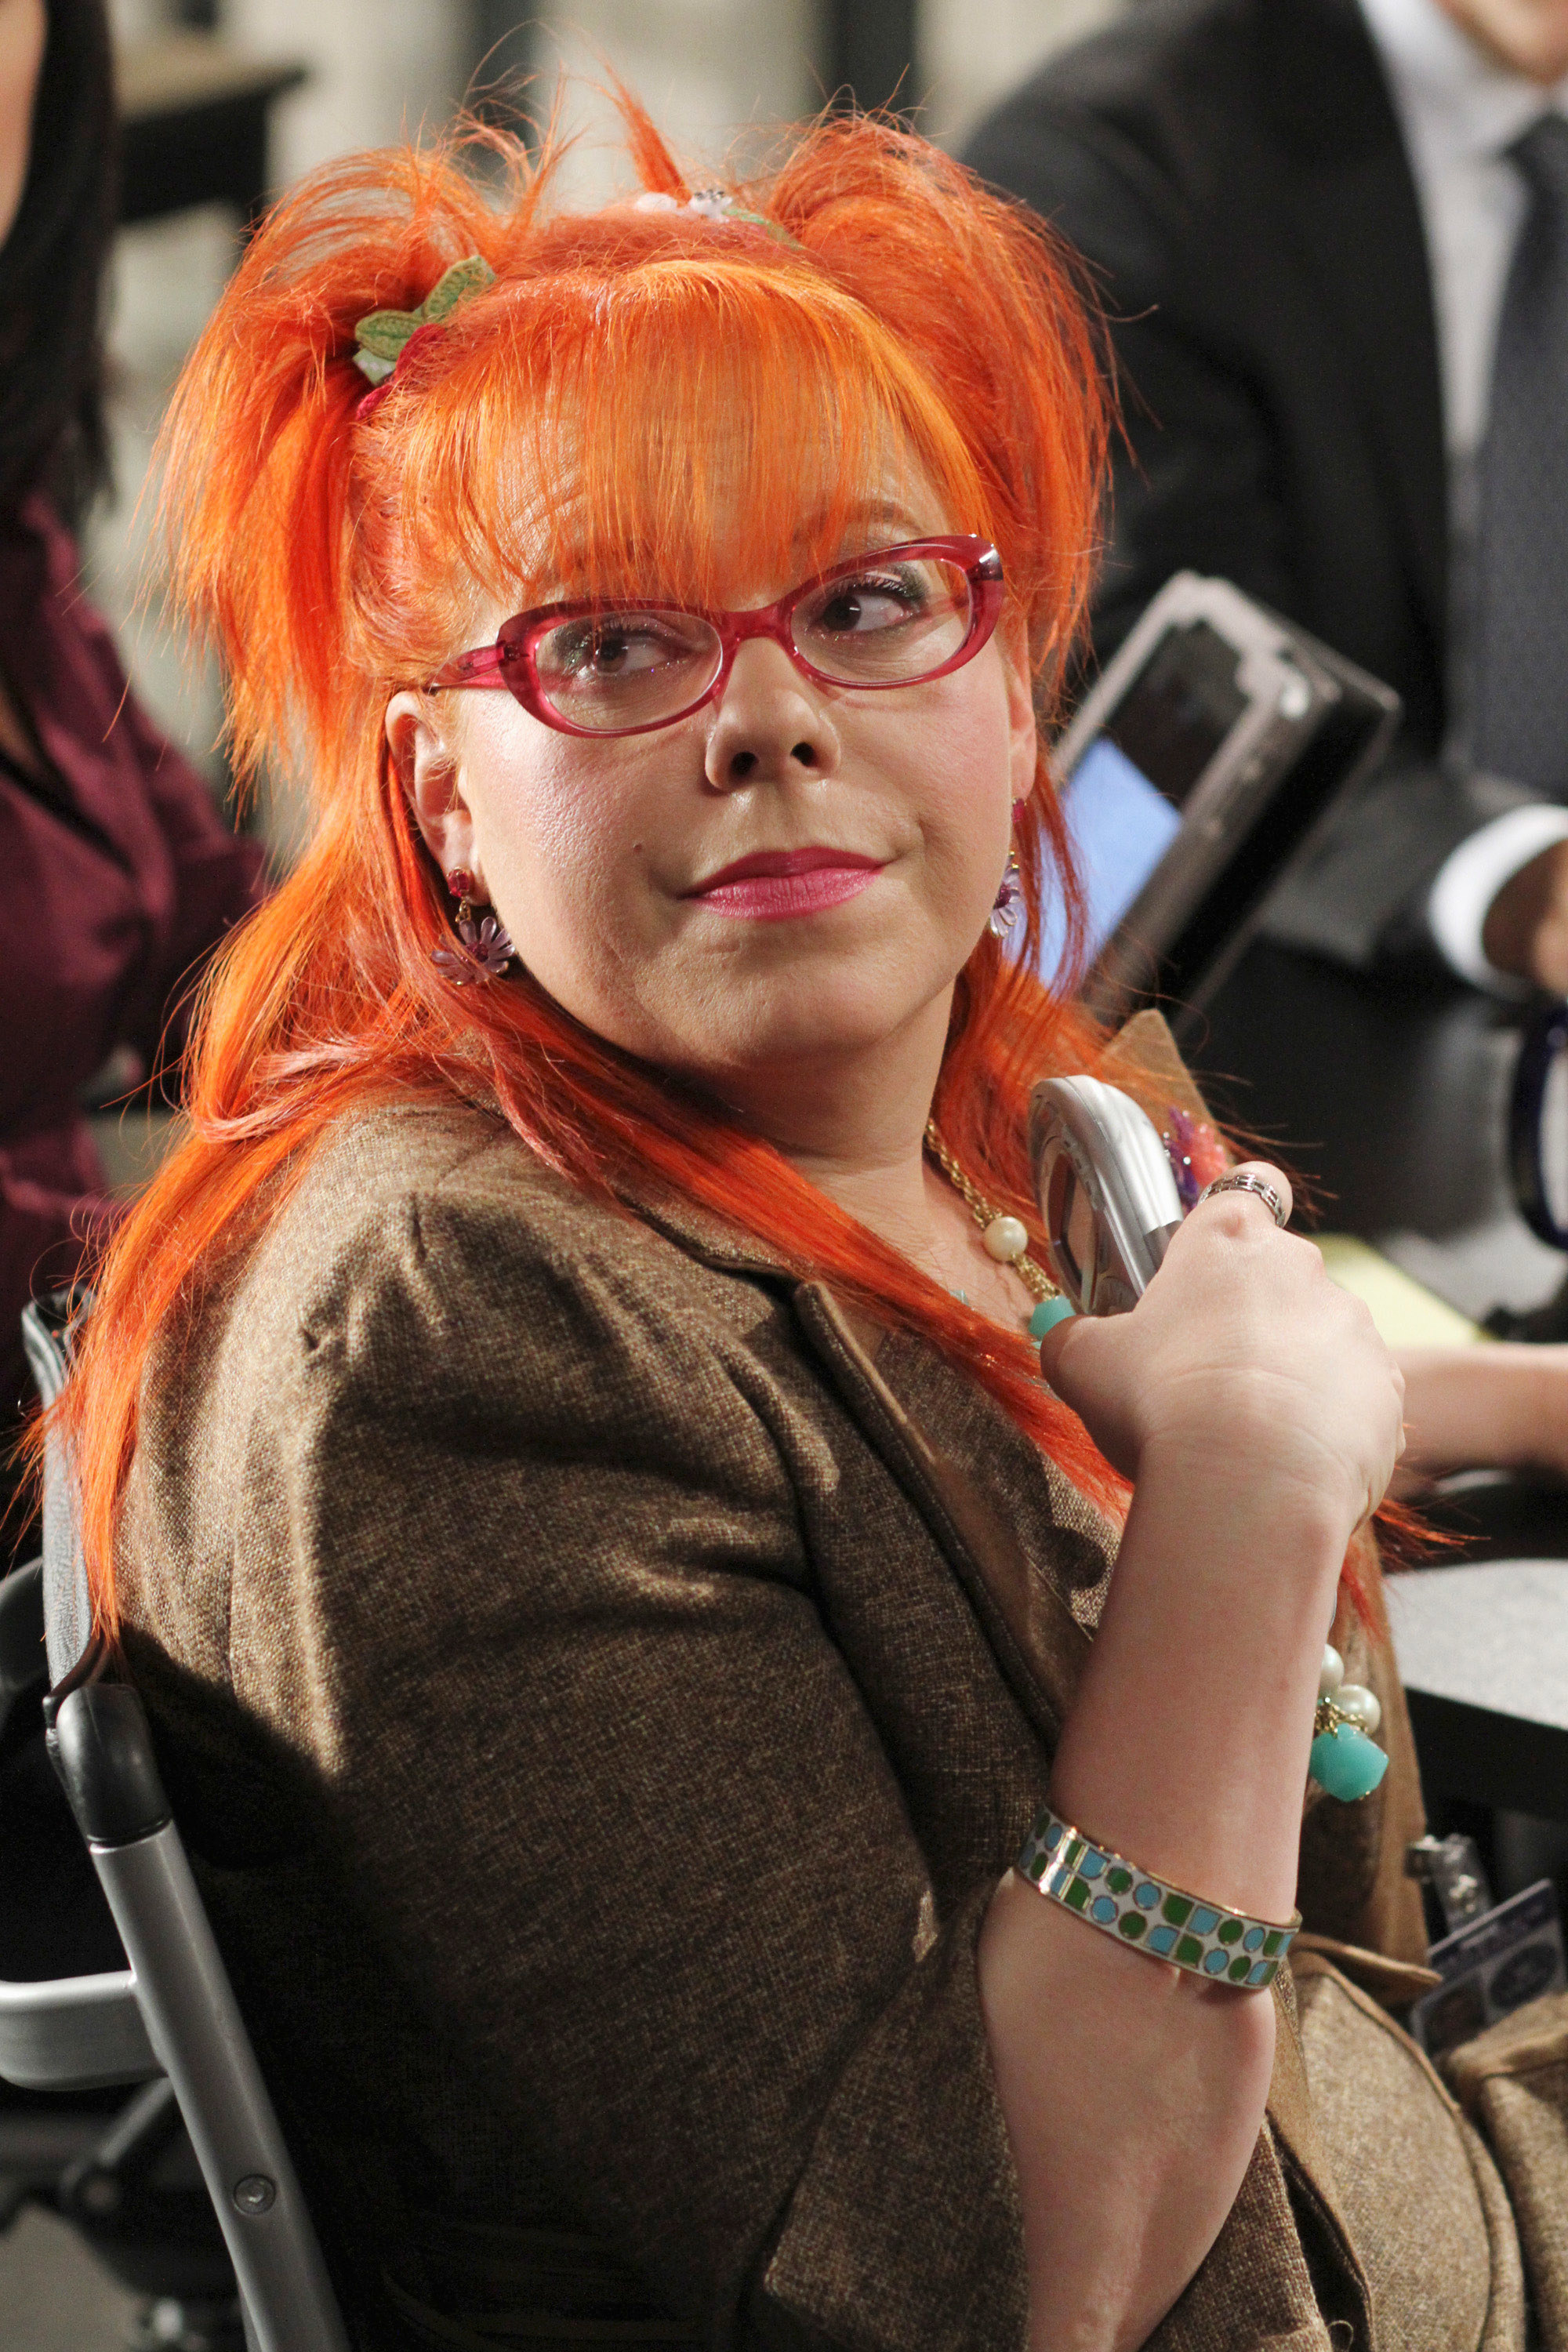 Penelope with bright orange hair and a pink pair of reading glasses